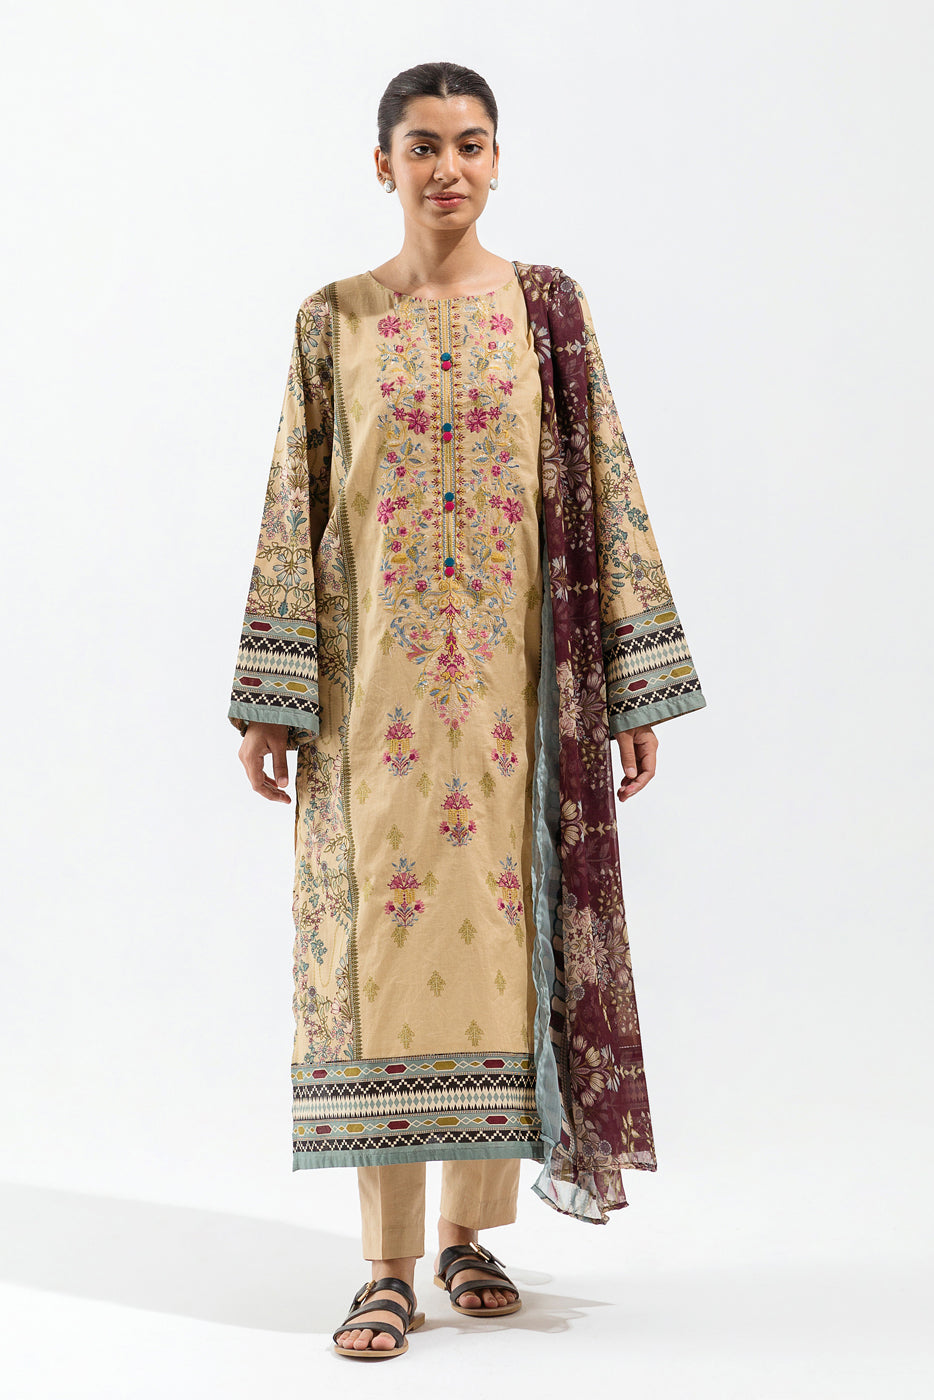 3 PIECE - EMBROIDERED LAWN SUIT - FAWN BLUSH - BEECHTREE